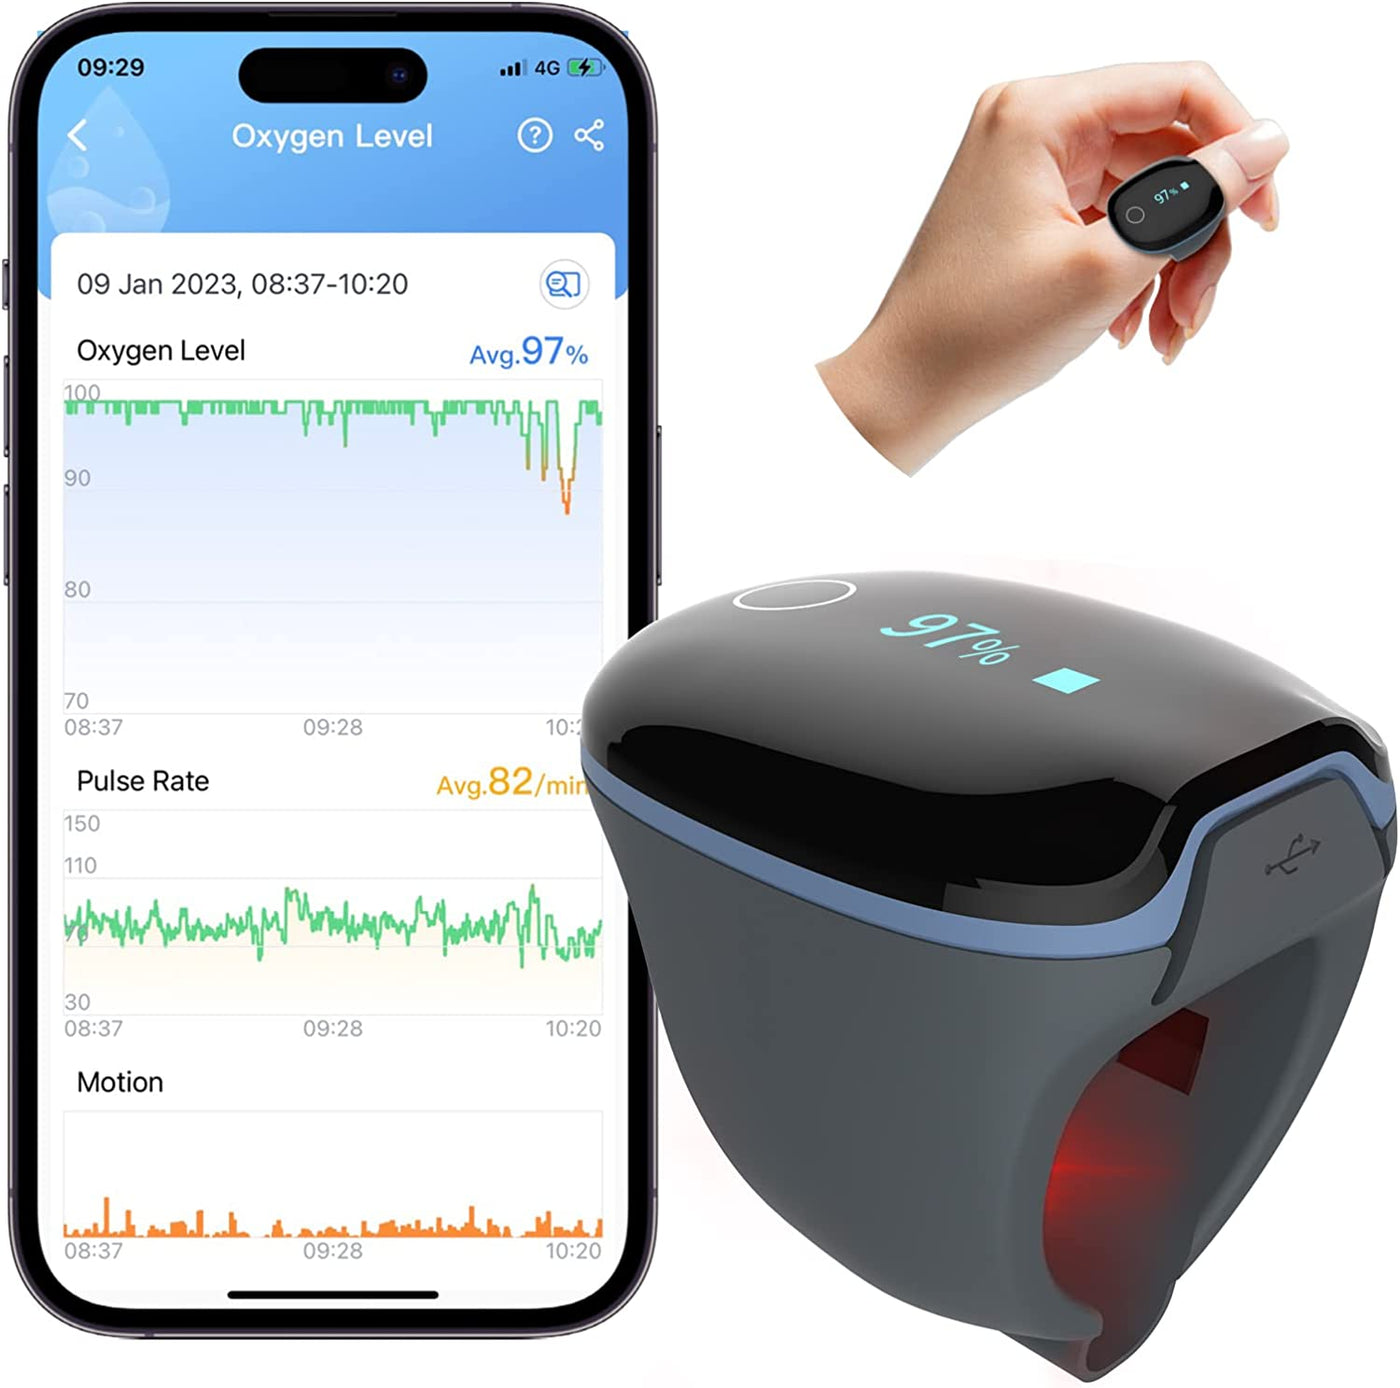 Bluetooth Pulse Oximeter Finger Monitor by Wellue,Fingertip Blood Oxygen  Saturation Monitor for Sports Home Wellness,Free App for iOS and